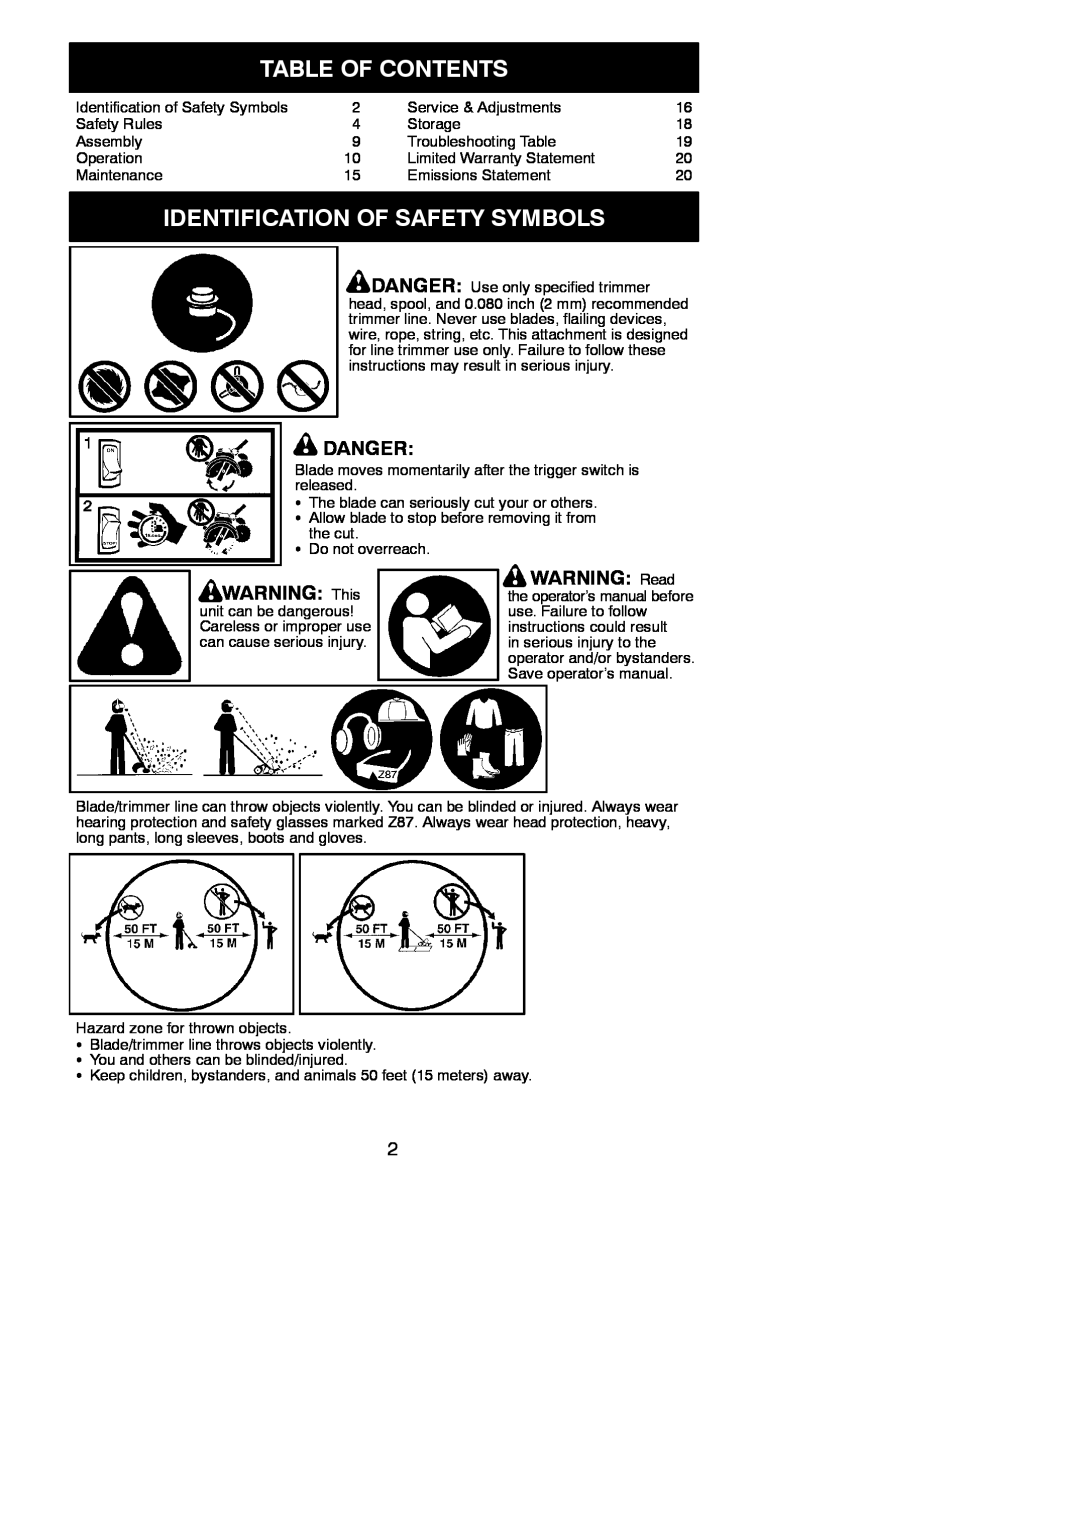 Poulan 952711963, 115275026 Table Of Contents, Identification Of Safety Symbols, Danger, WARNING This, WARNING Read 